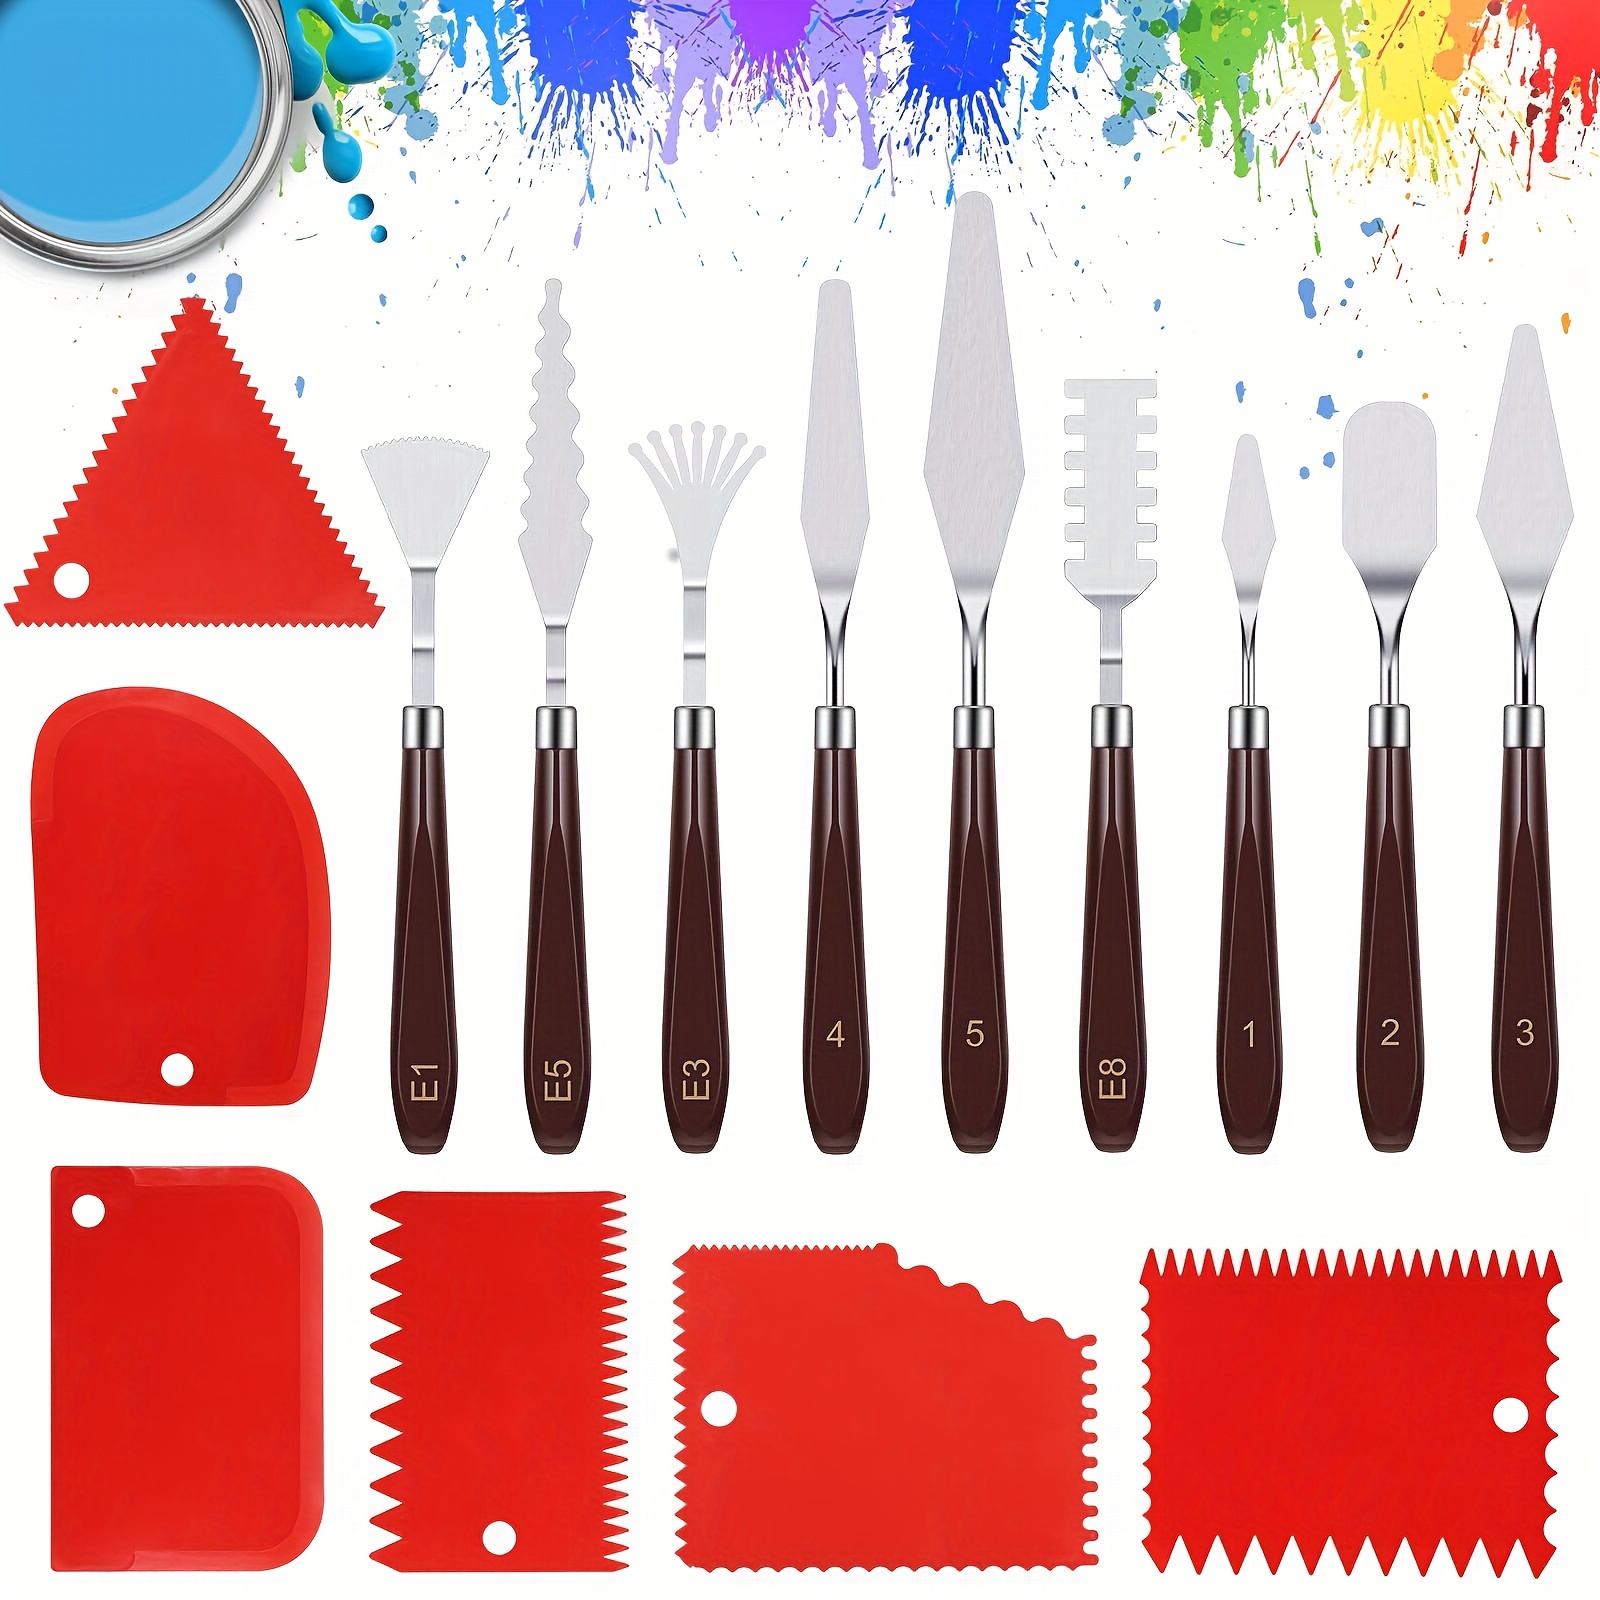 

15pcs Acrylic Painting Spatula, Palette Knife Acrylic Painting Set, 9pcs Stainless Steel Painting Knife And 6pcs Plastic Tooth Spatula For Texture Paste, Watercolor, Oil Painting, Gouache